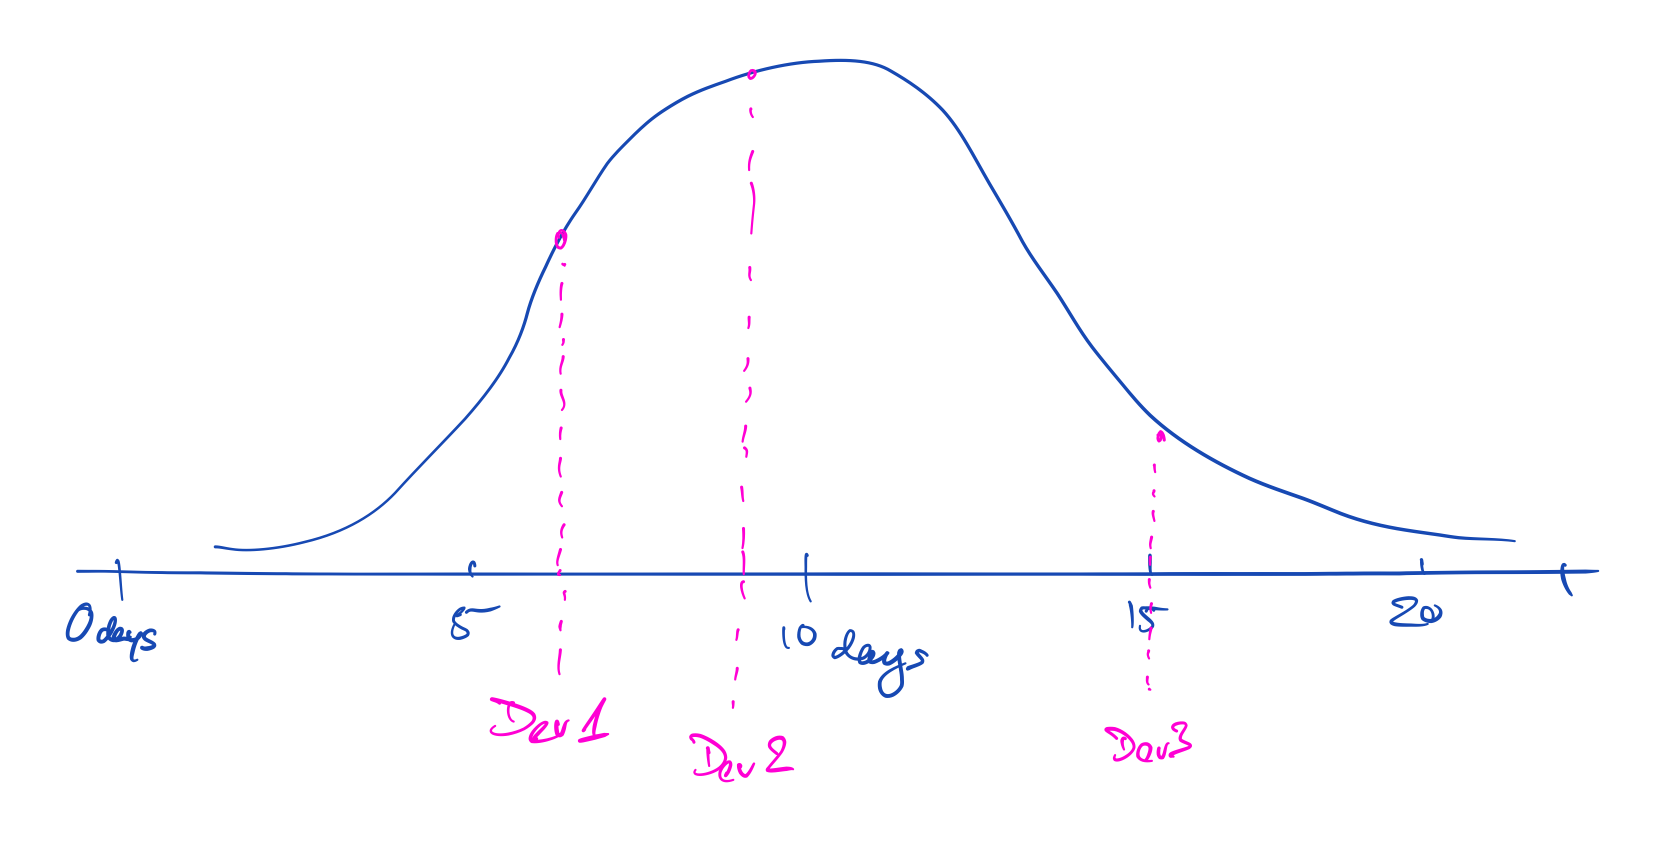 A sketch a normal distribution (bell curve) of effort in days, with 3 estimates by 3 developers.